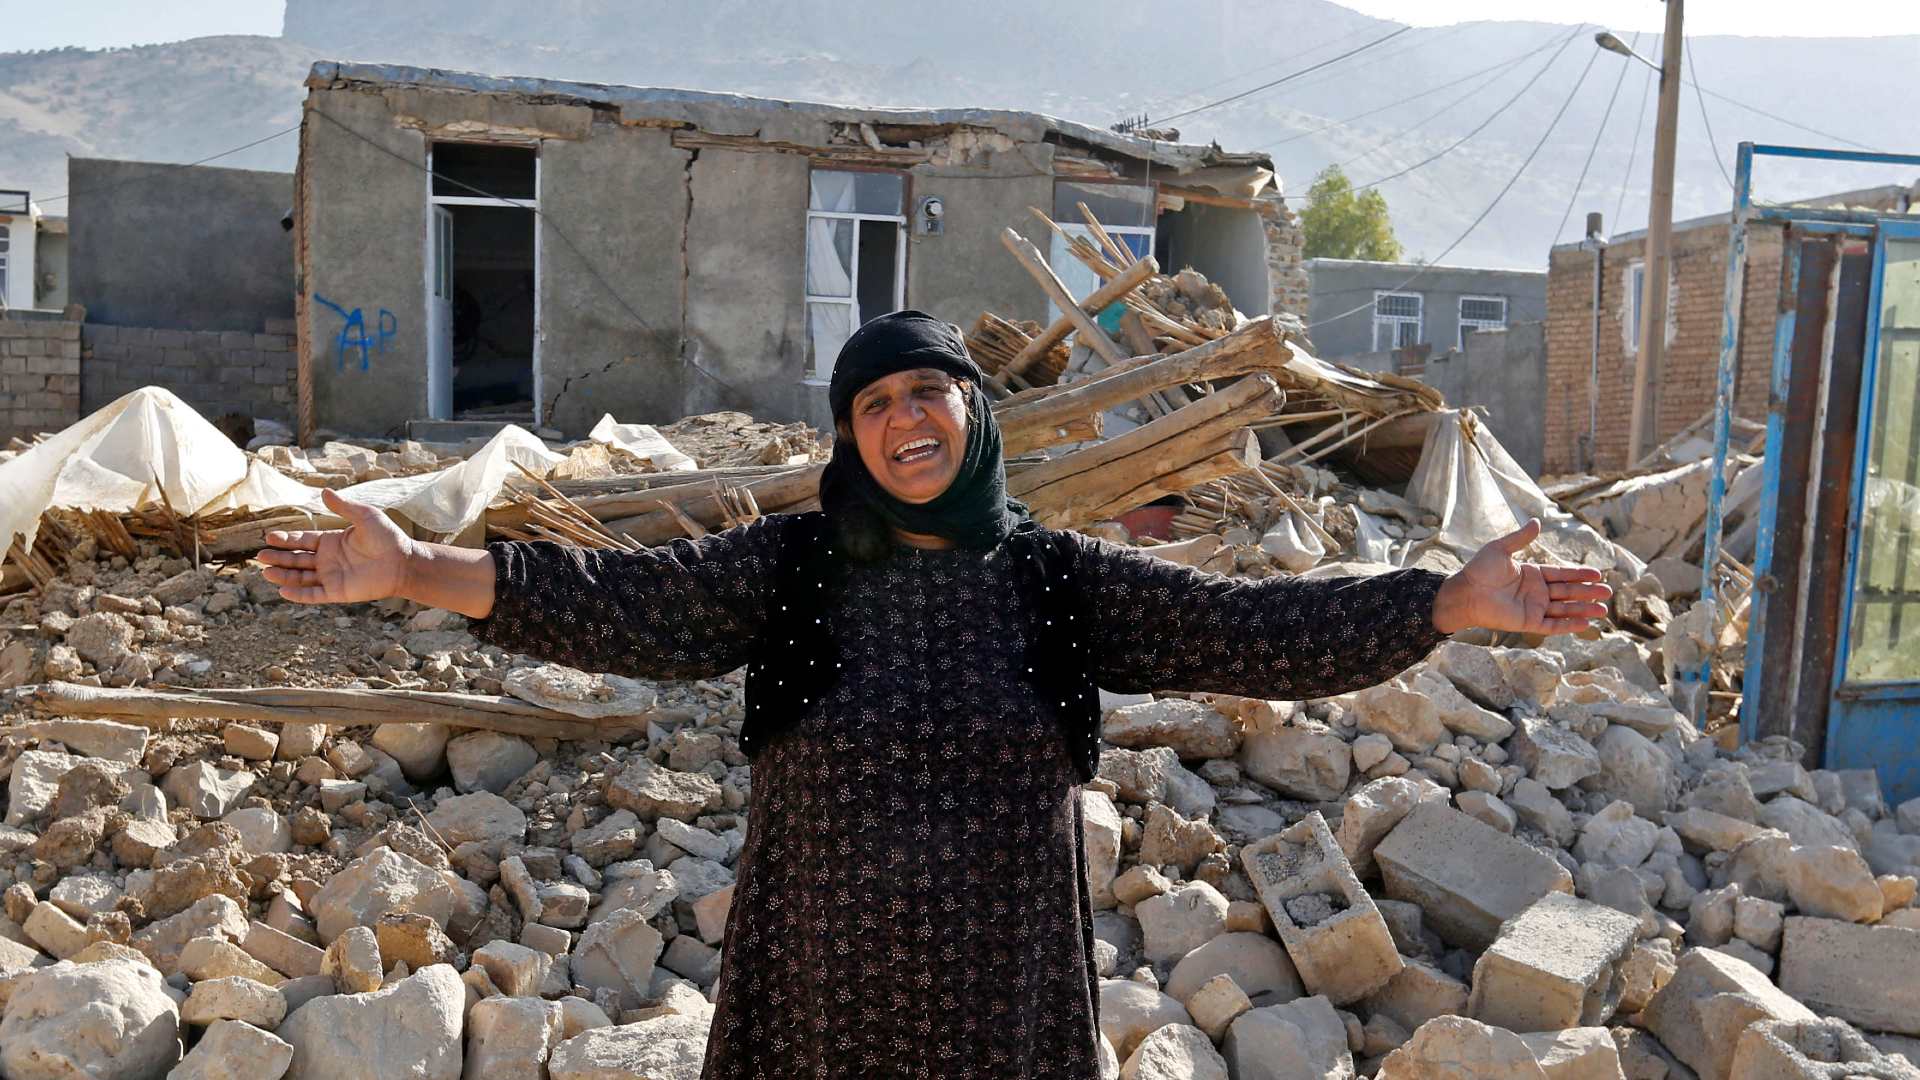 A woman stands in front of the rubble of her home in Iran's Kermanshah province following an earthquake in November 2017 (AFP)